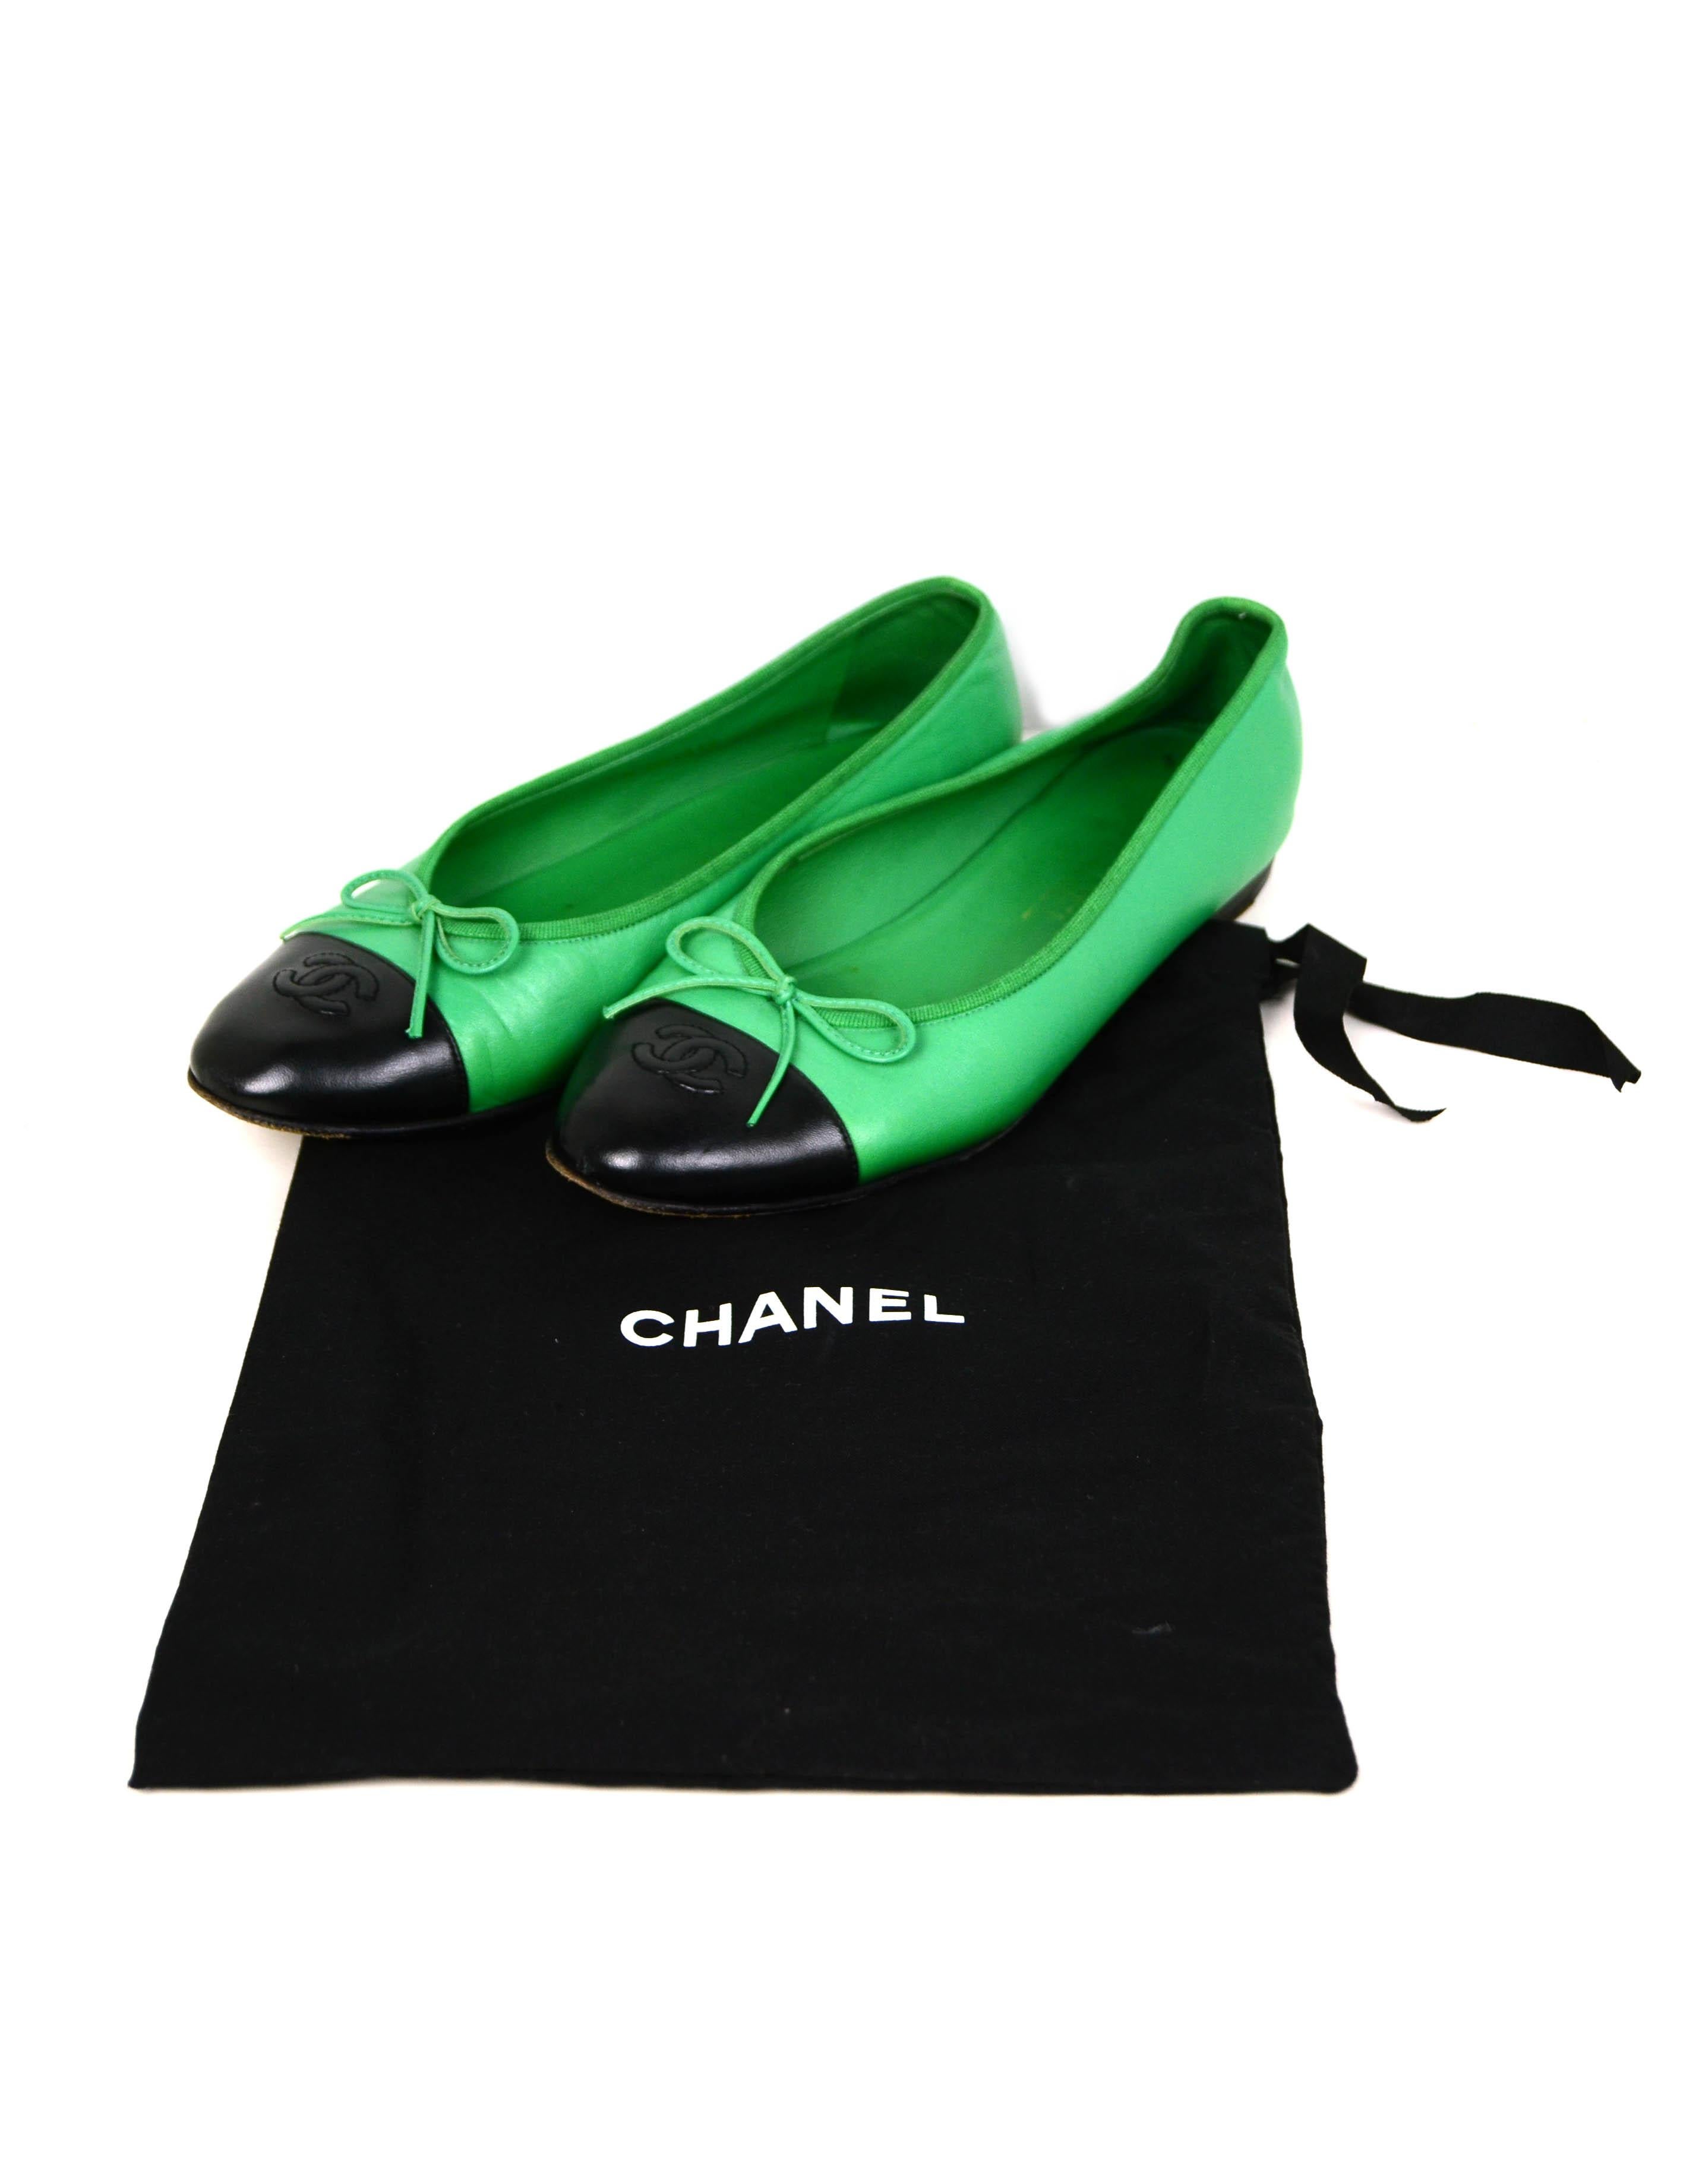 Chanel Green & Black Lambskin Cap Toe CC Ballerina Flat sz 39

Made In: Italy
Color: Green and black
Materials: Lambskin leather
Closure/Opening: Slip on
Overall Condition: Very good pre-owned condition with the exception of light wear
throughout. 